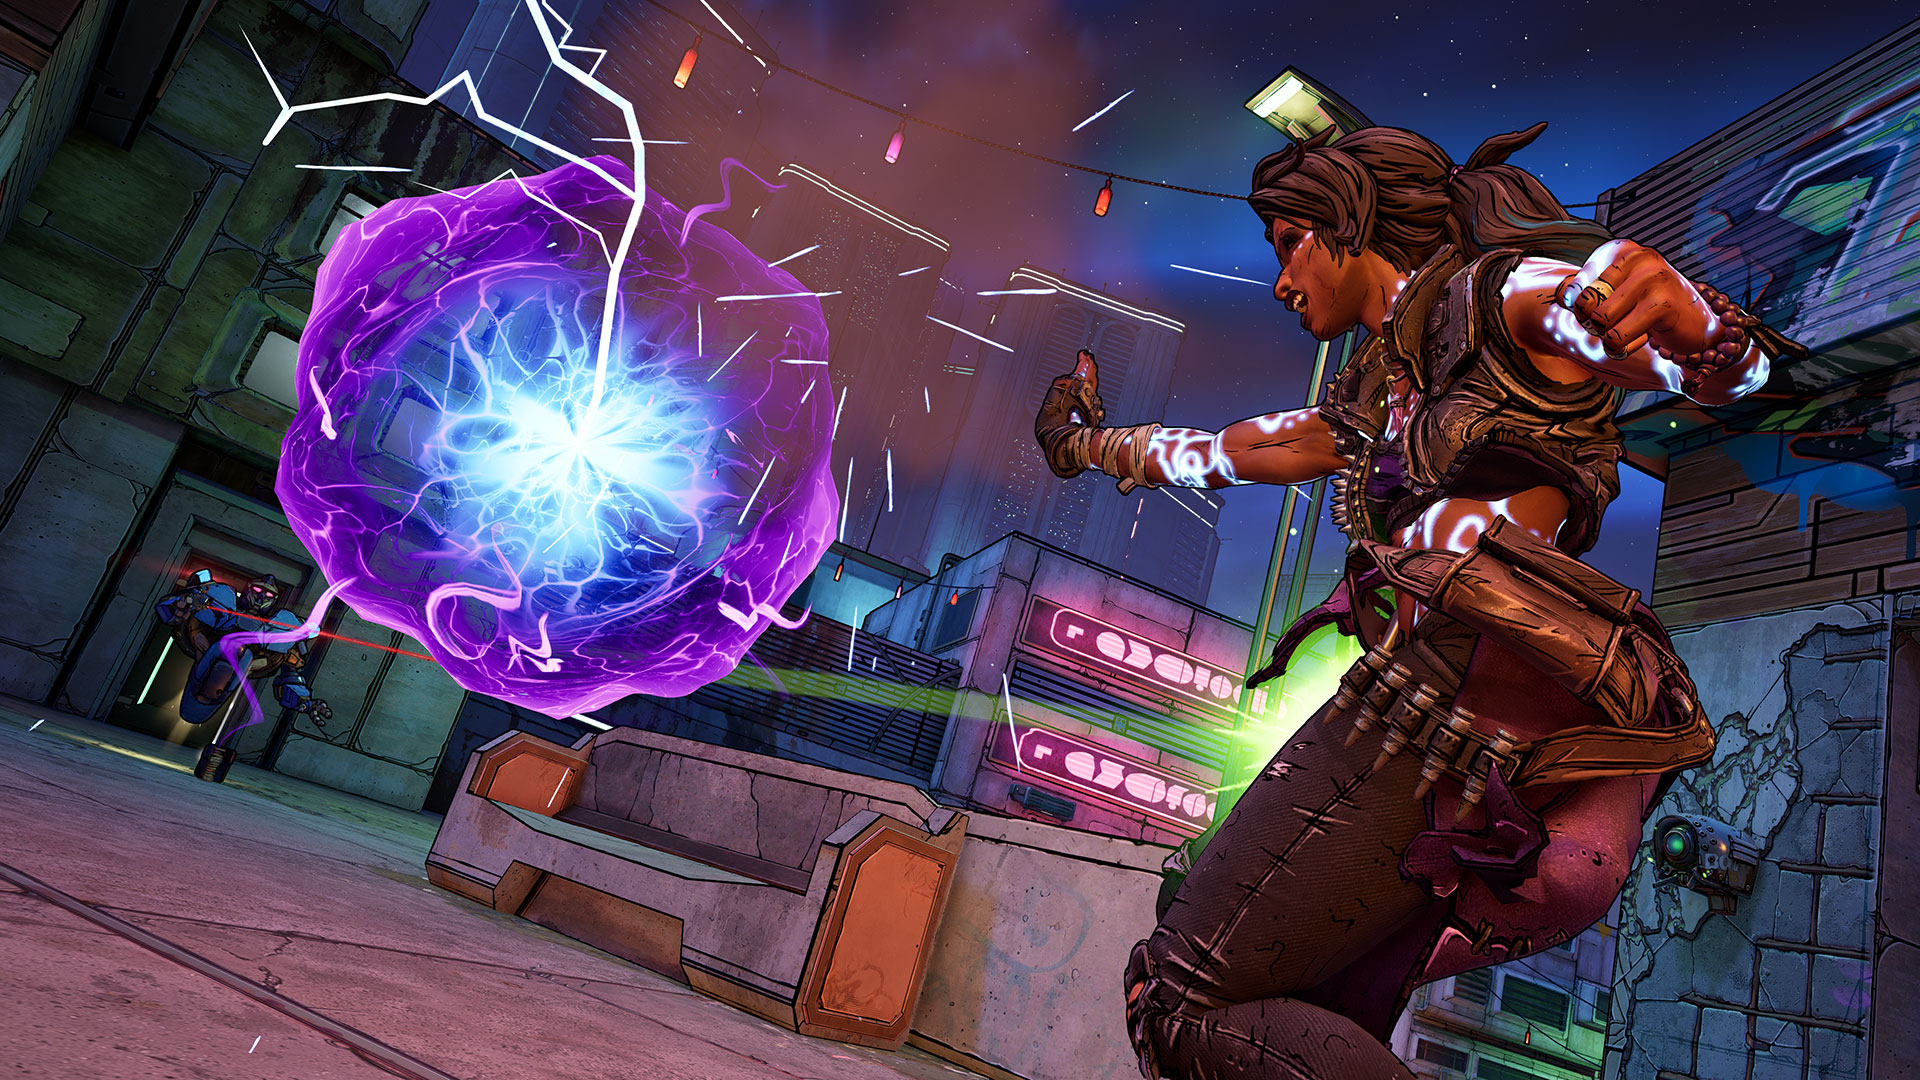 Two New Borderlands 3 Skill Trees Revealed Ahead of Designer’s Cut Launch on November 10